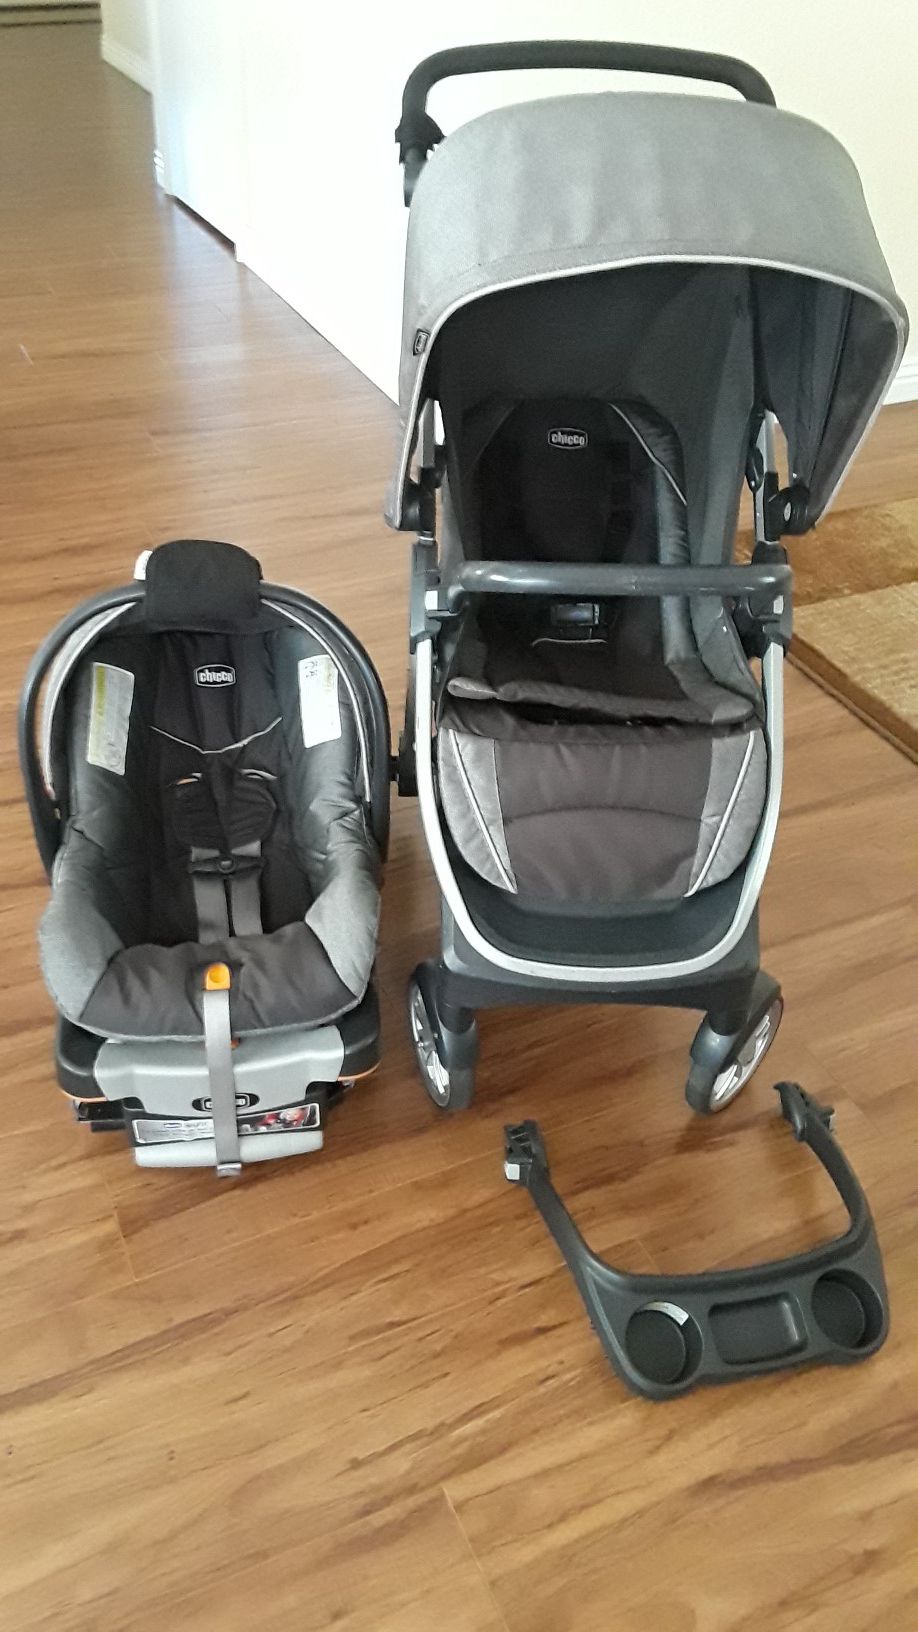 Chicco Bravo Travel System stroller and car seat with base.